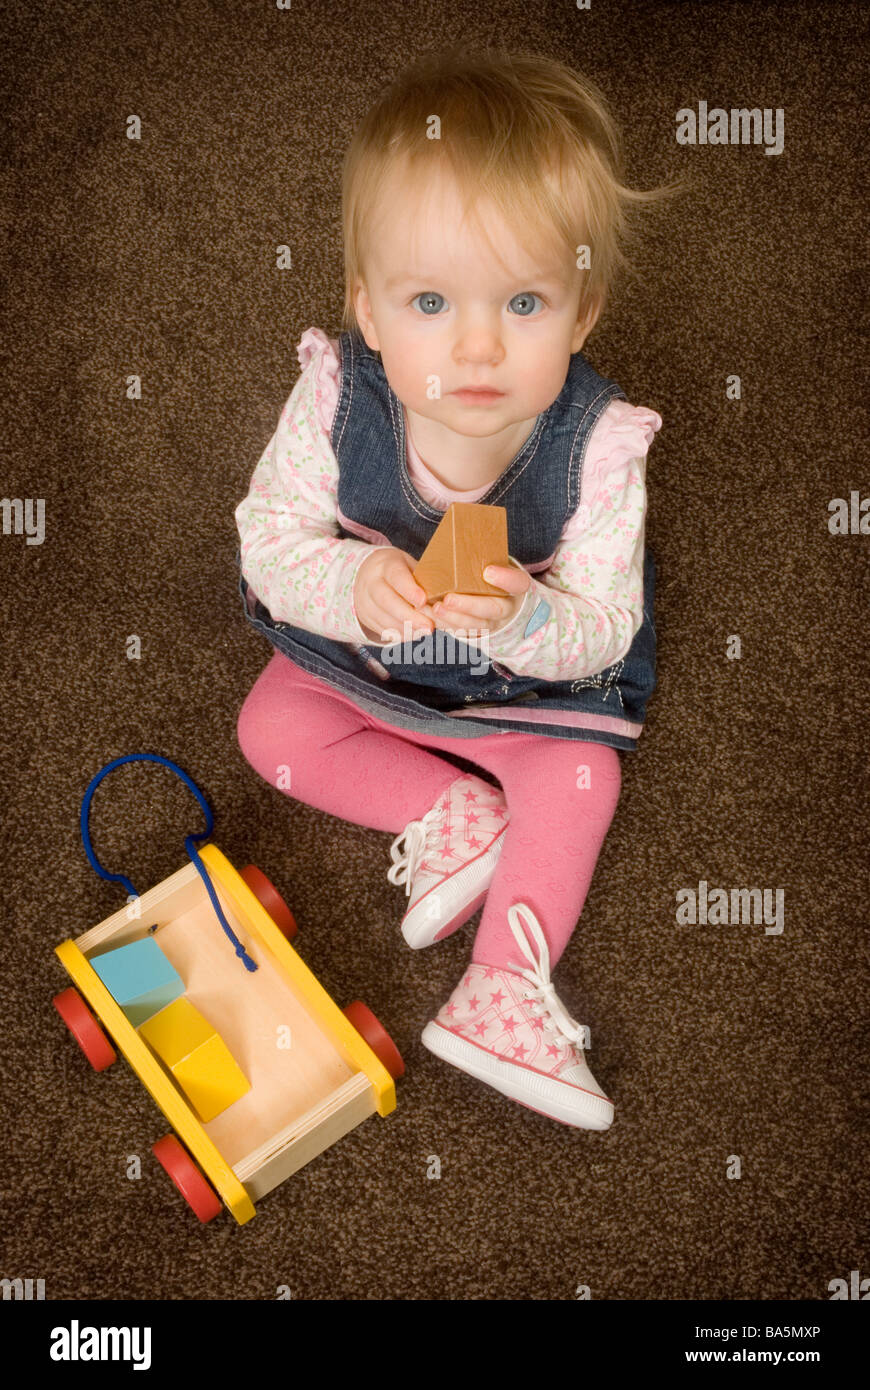 Portrait of a year old baby girl Stock Photo